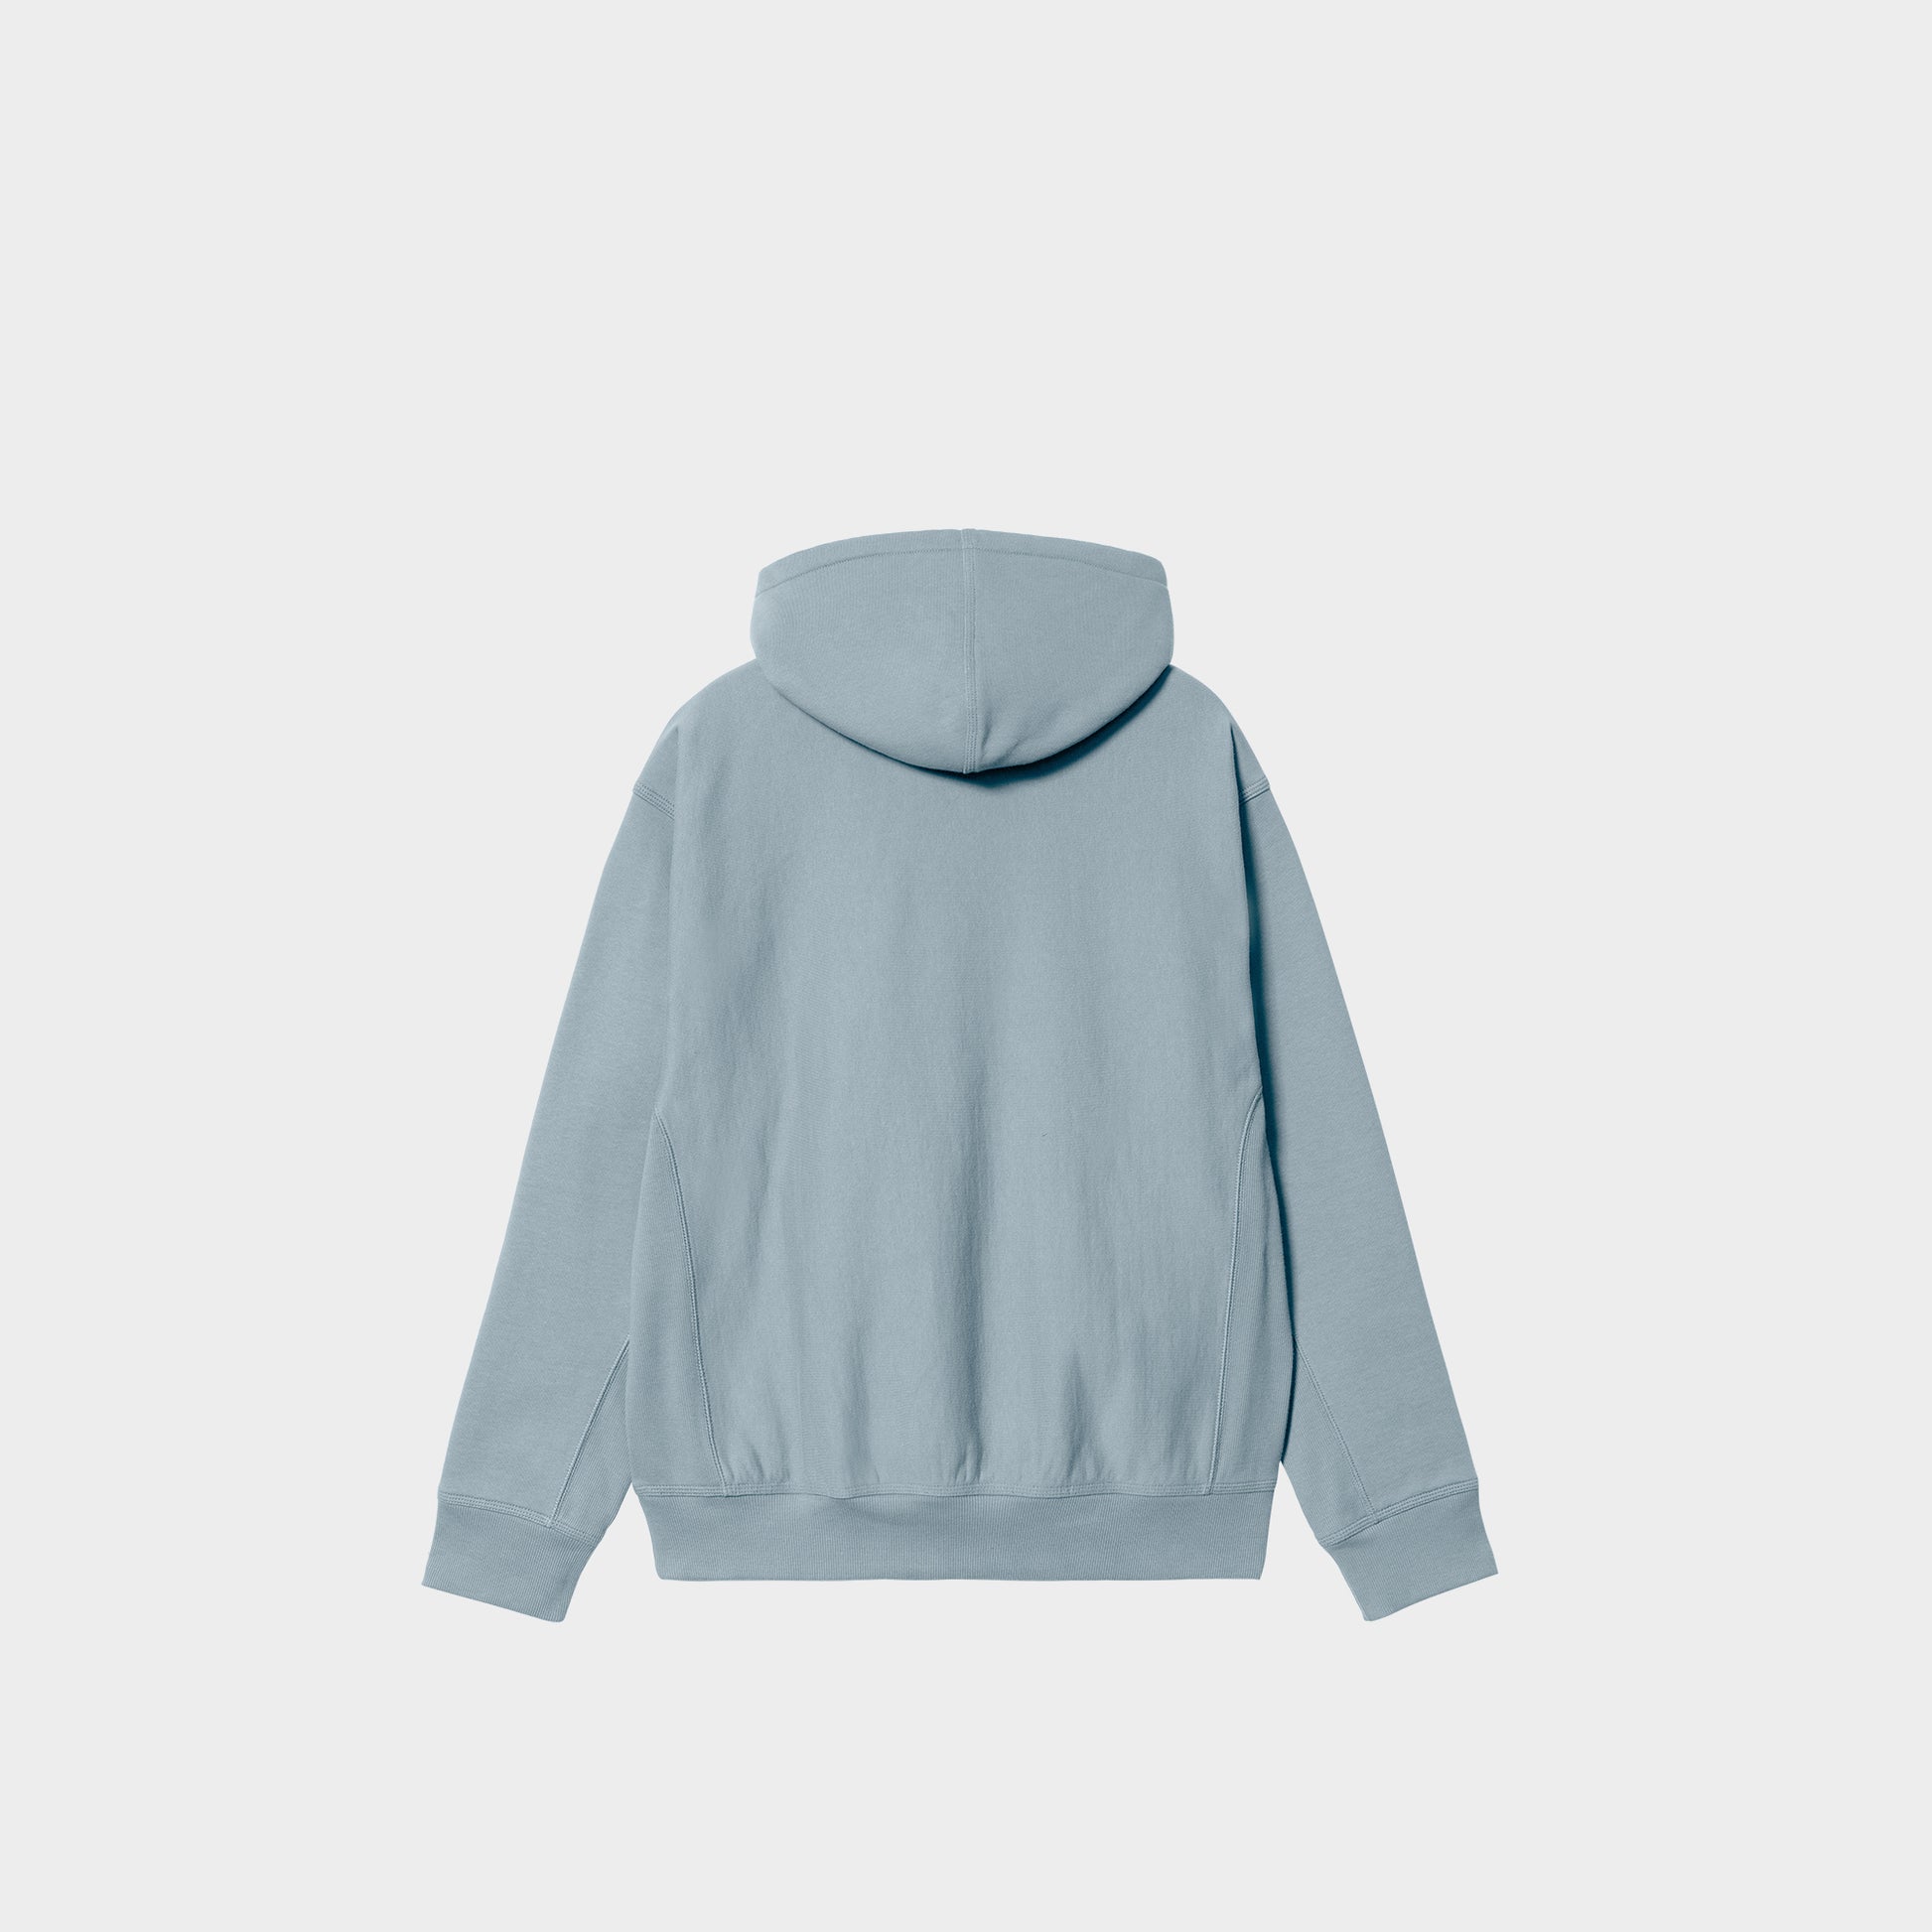 Carhartt WIP Hooded American Script Jacket in Farbe frosted_Blue